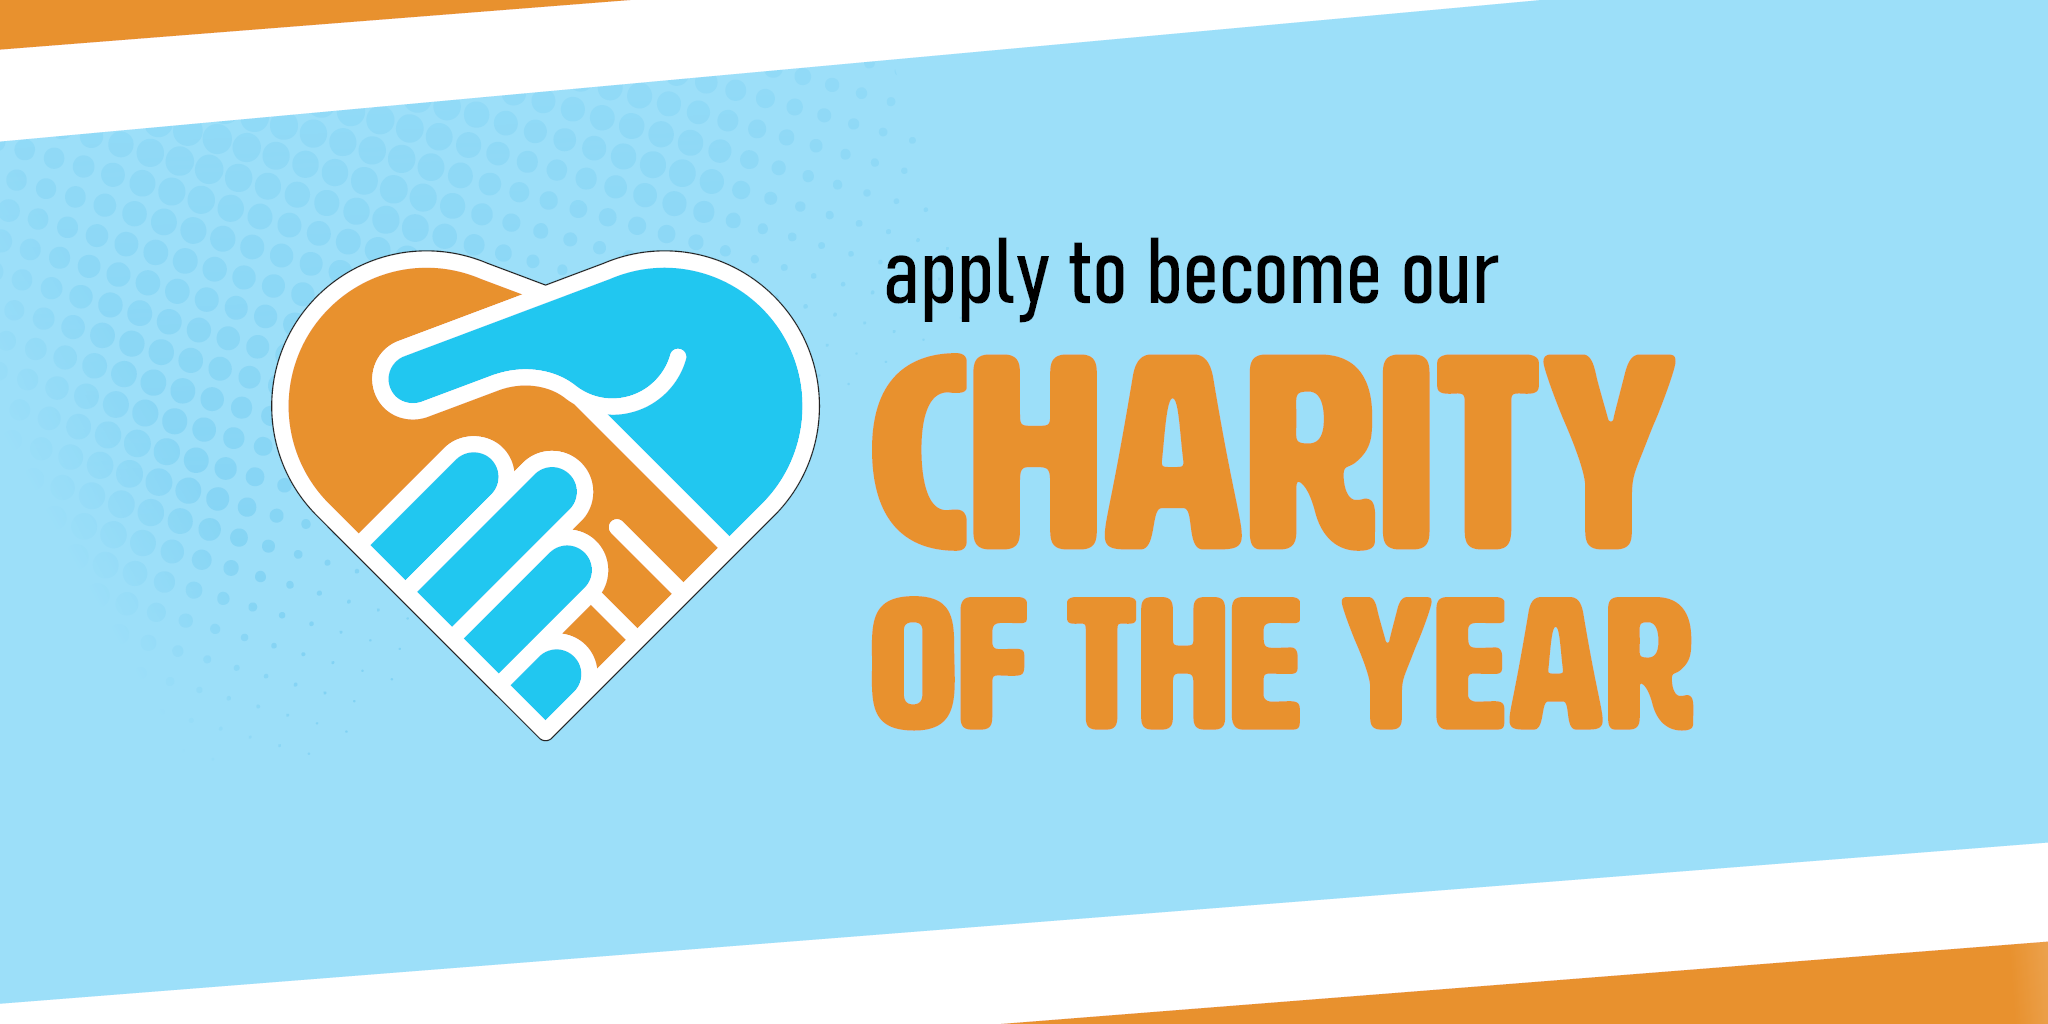 Charity of the year application image